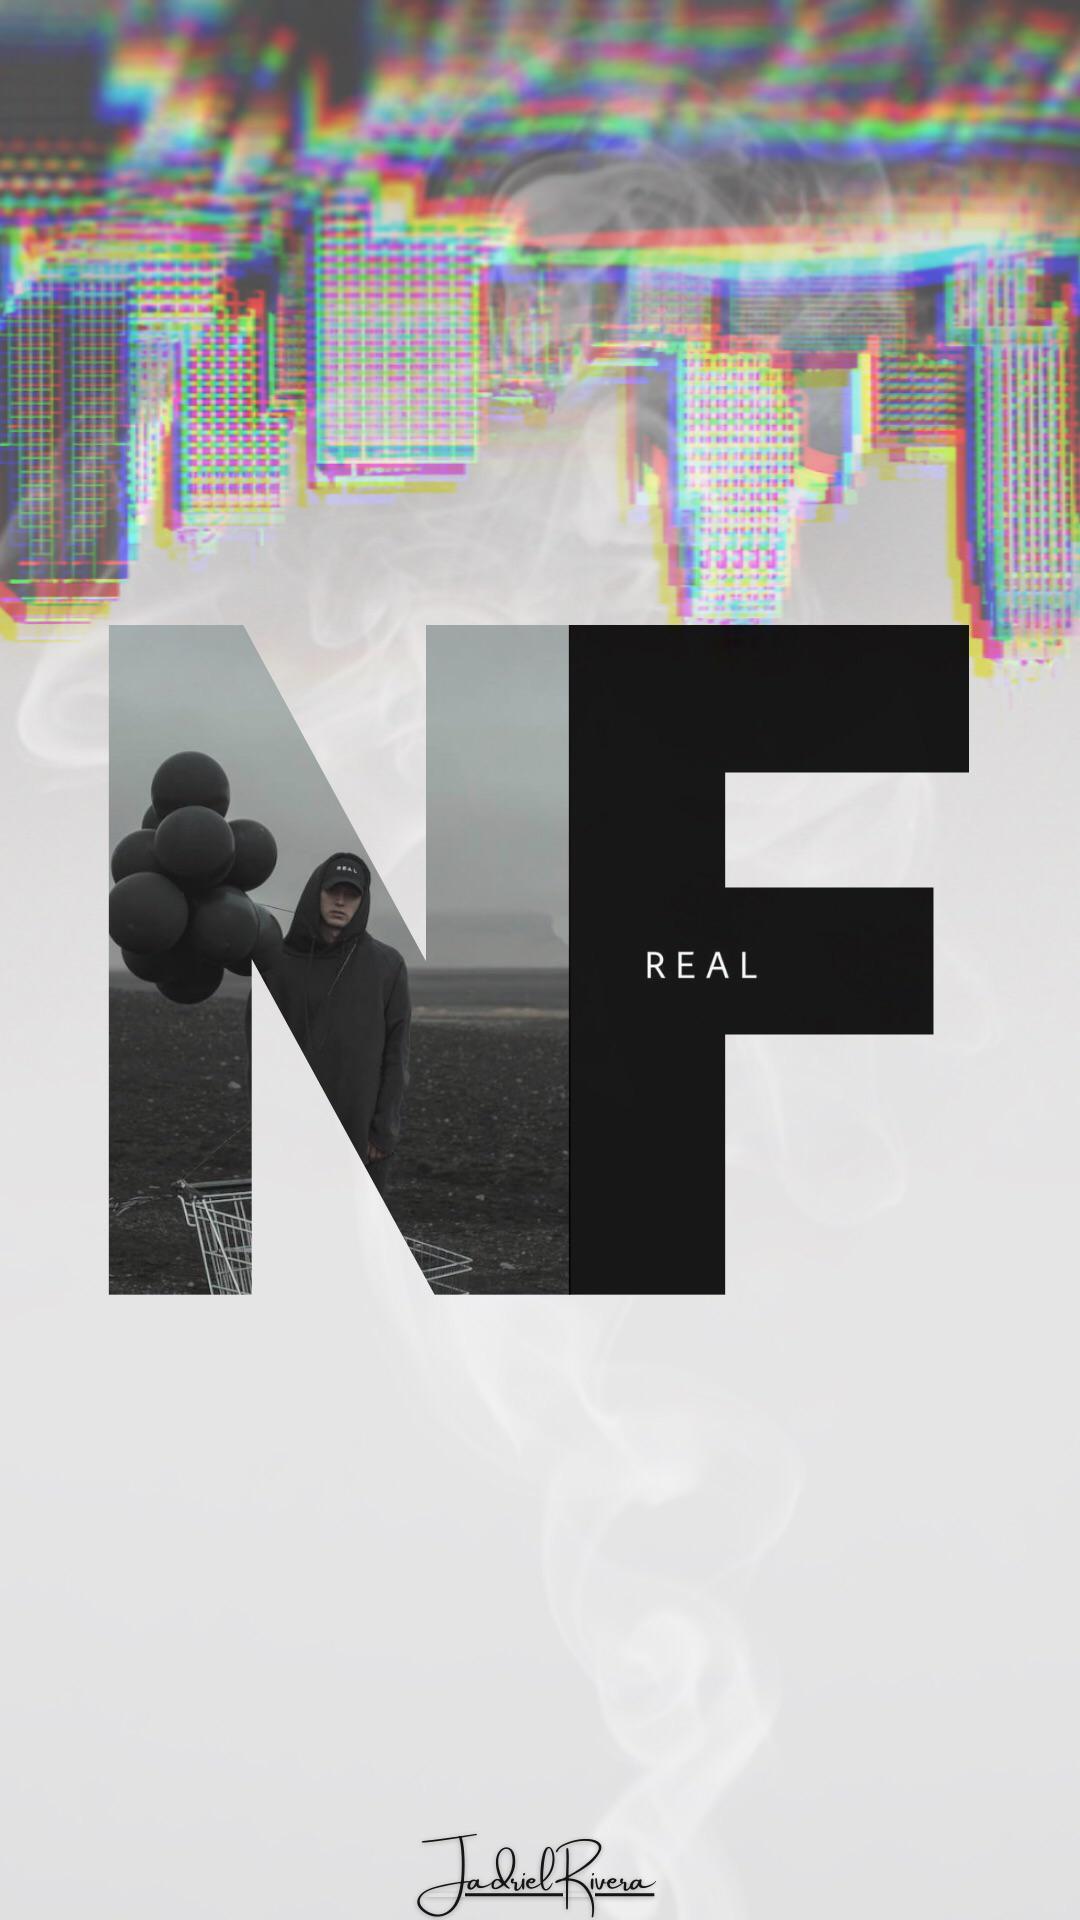 NF - JUST LIKE YOU (Audio) 